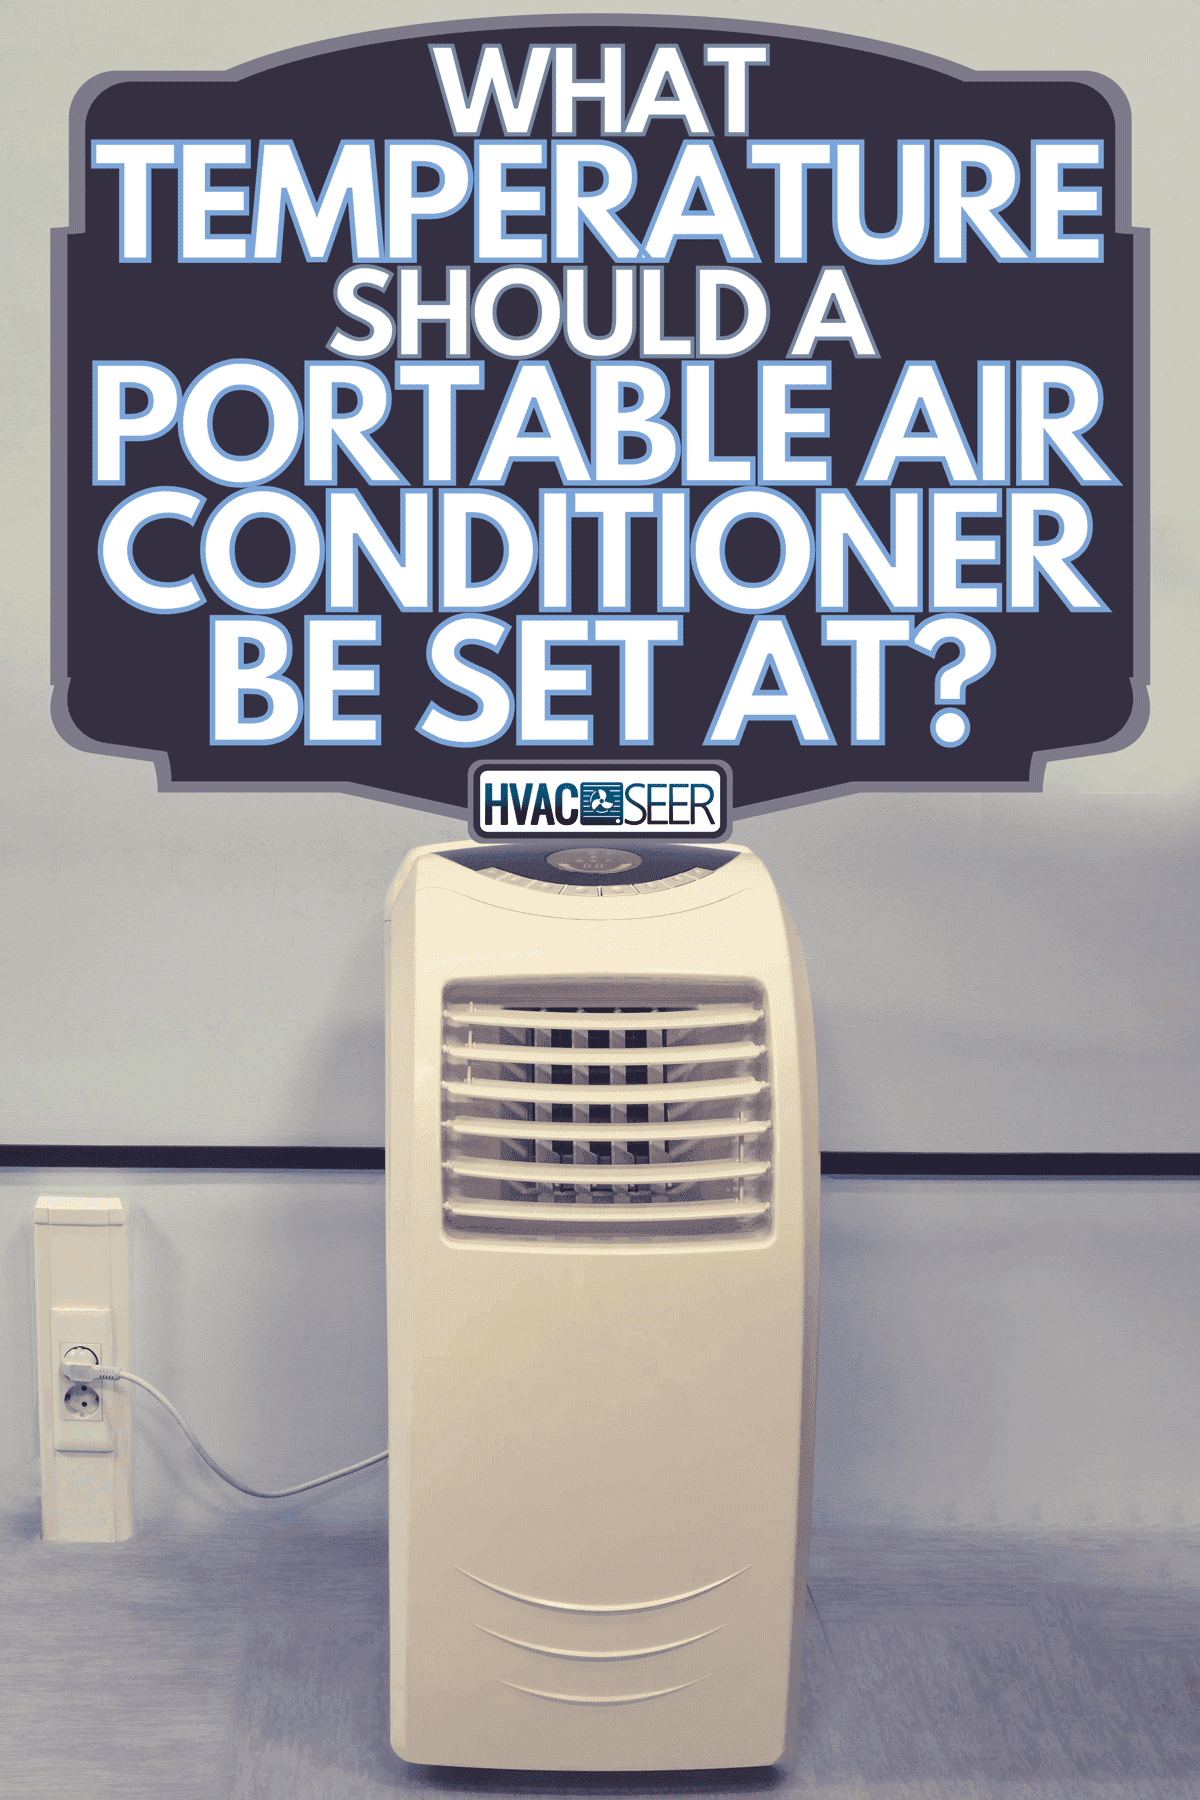 Portable air conditioner in the office connected to an outlet, What Temperature Should A Portable Air Conditioner Be Set At?